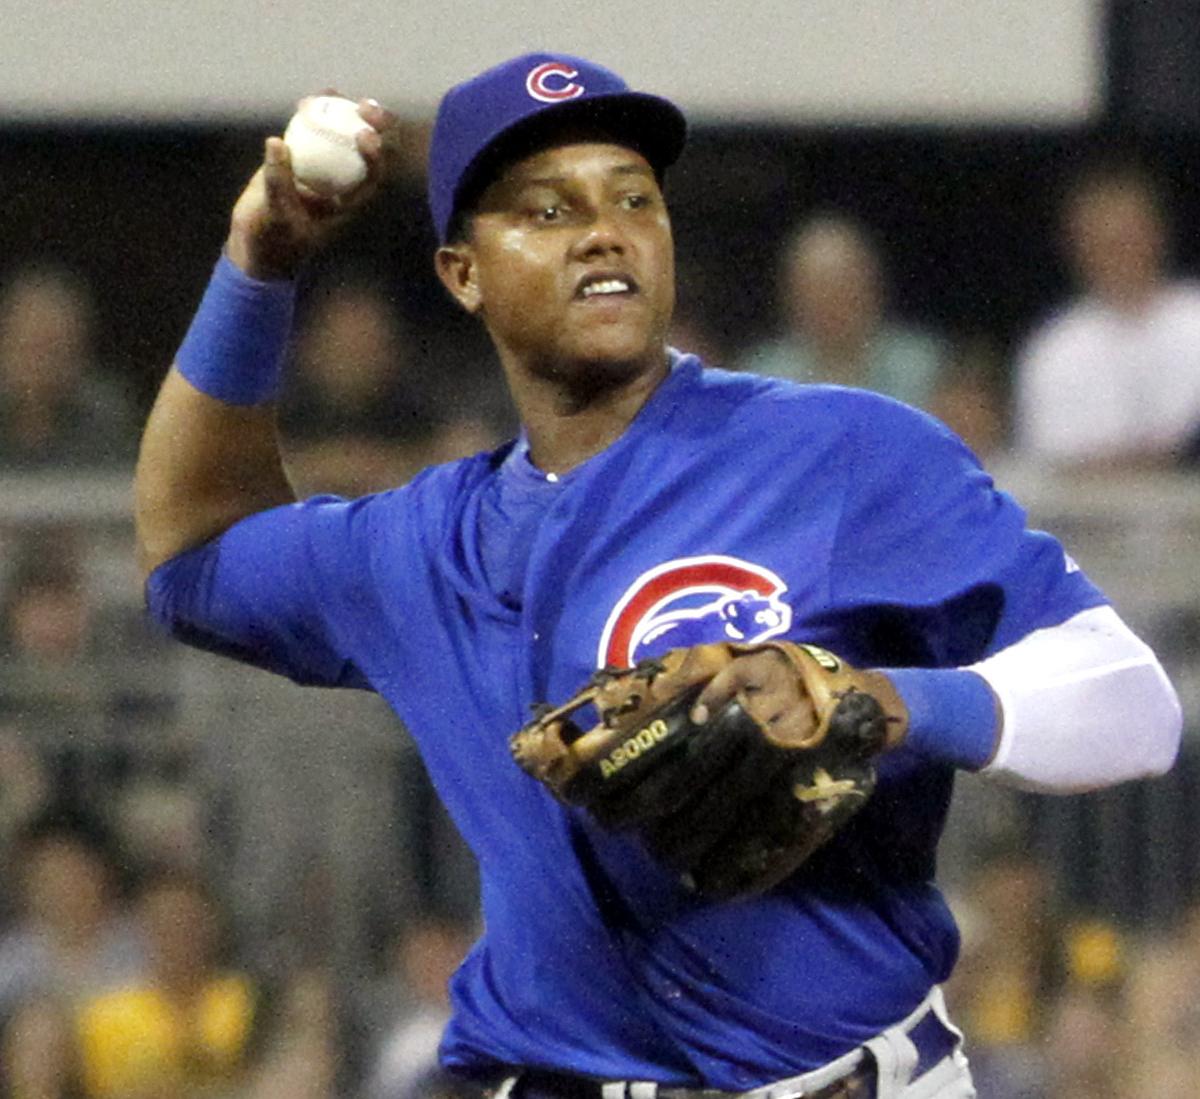 Starlin Castro determined to make up for lost time in second year